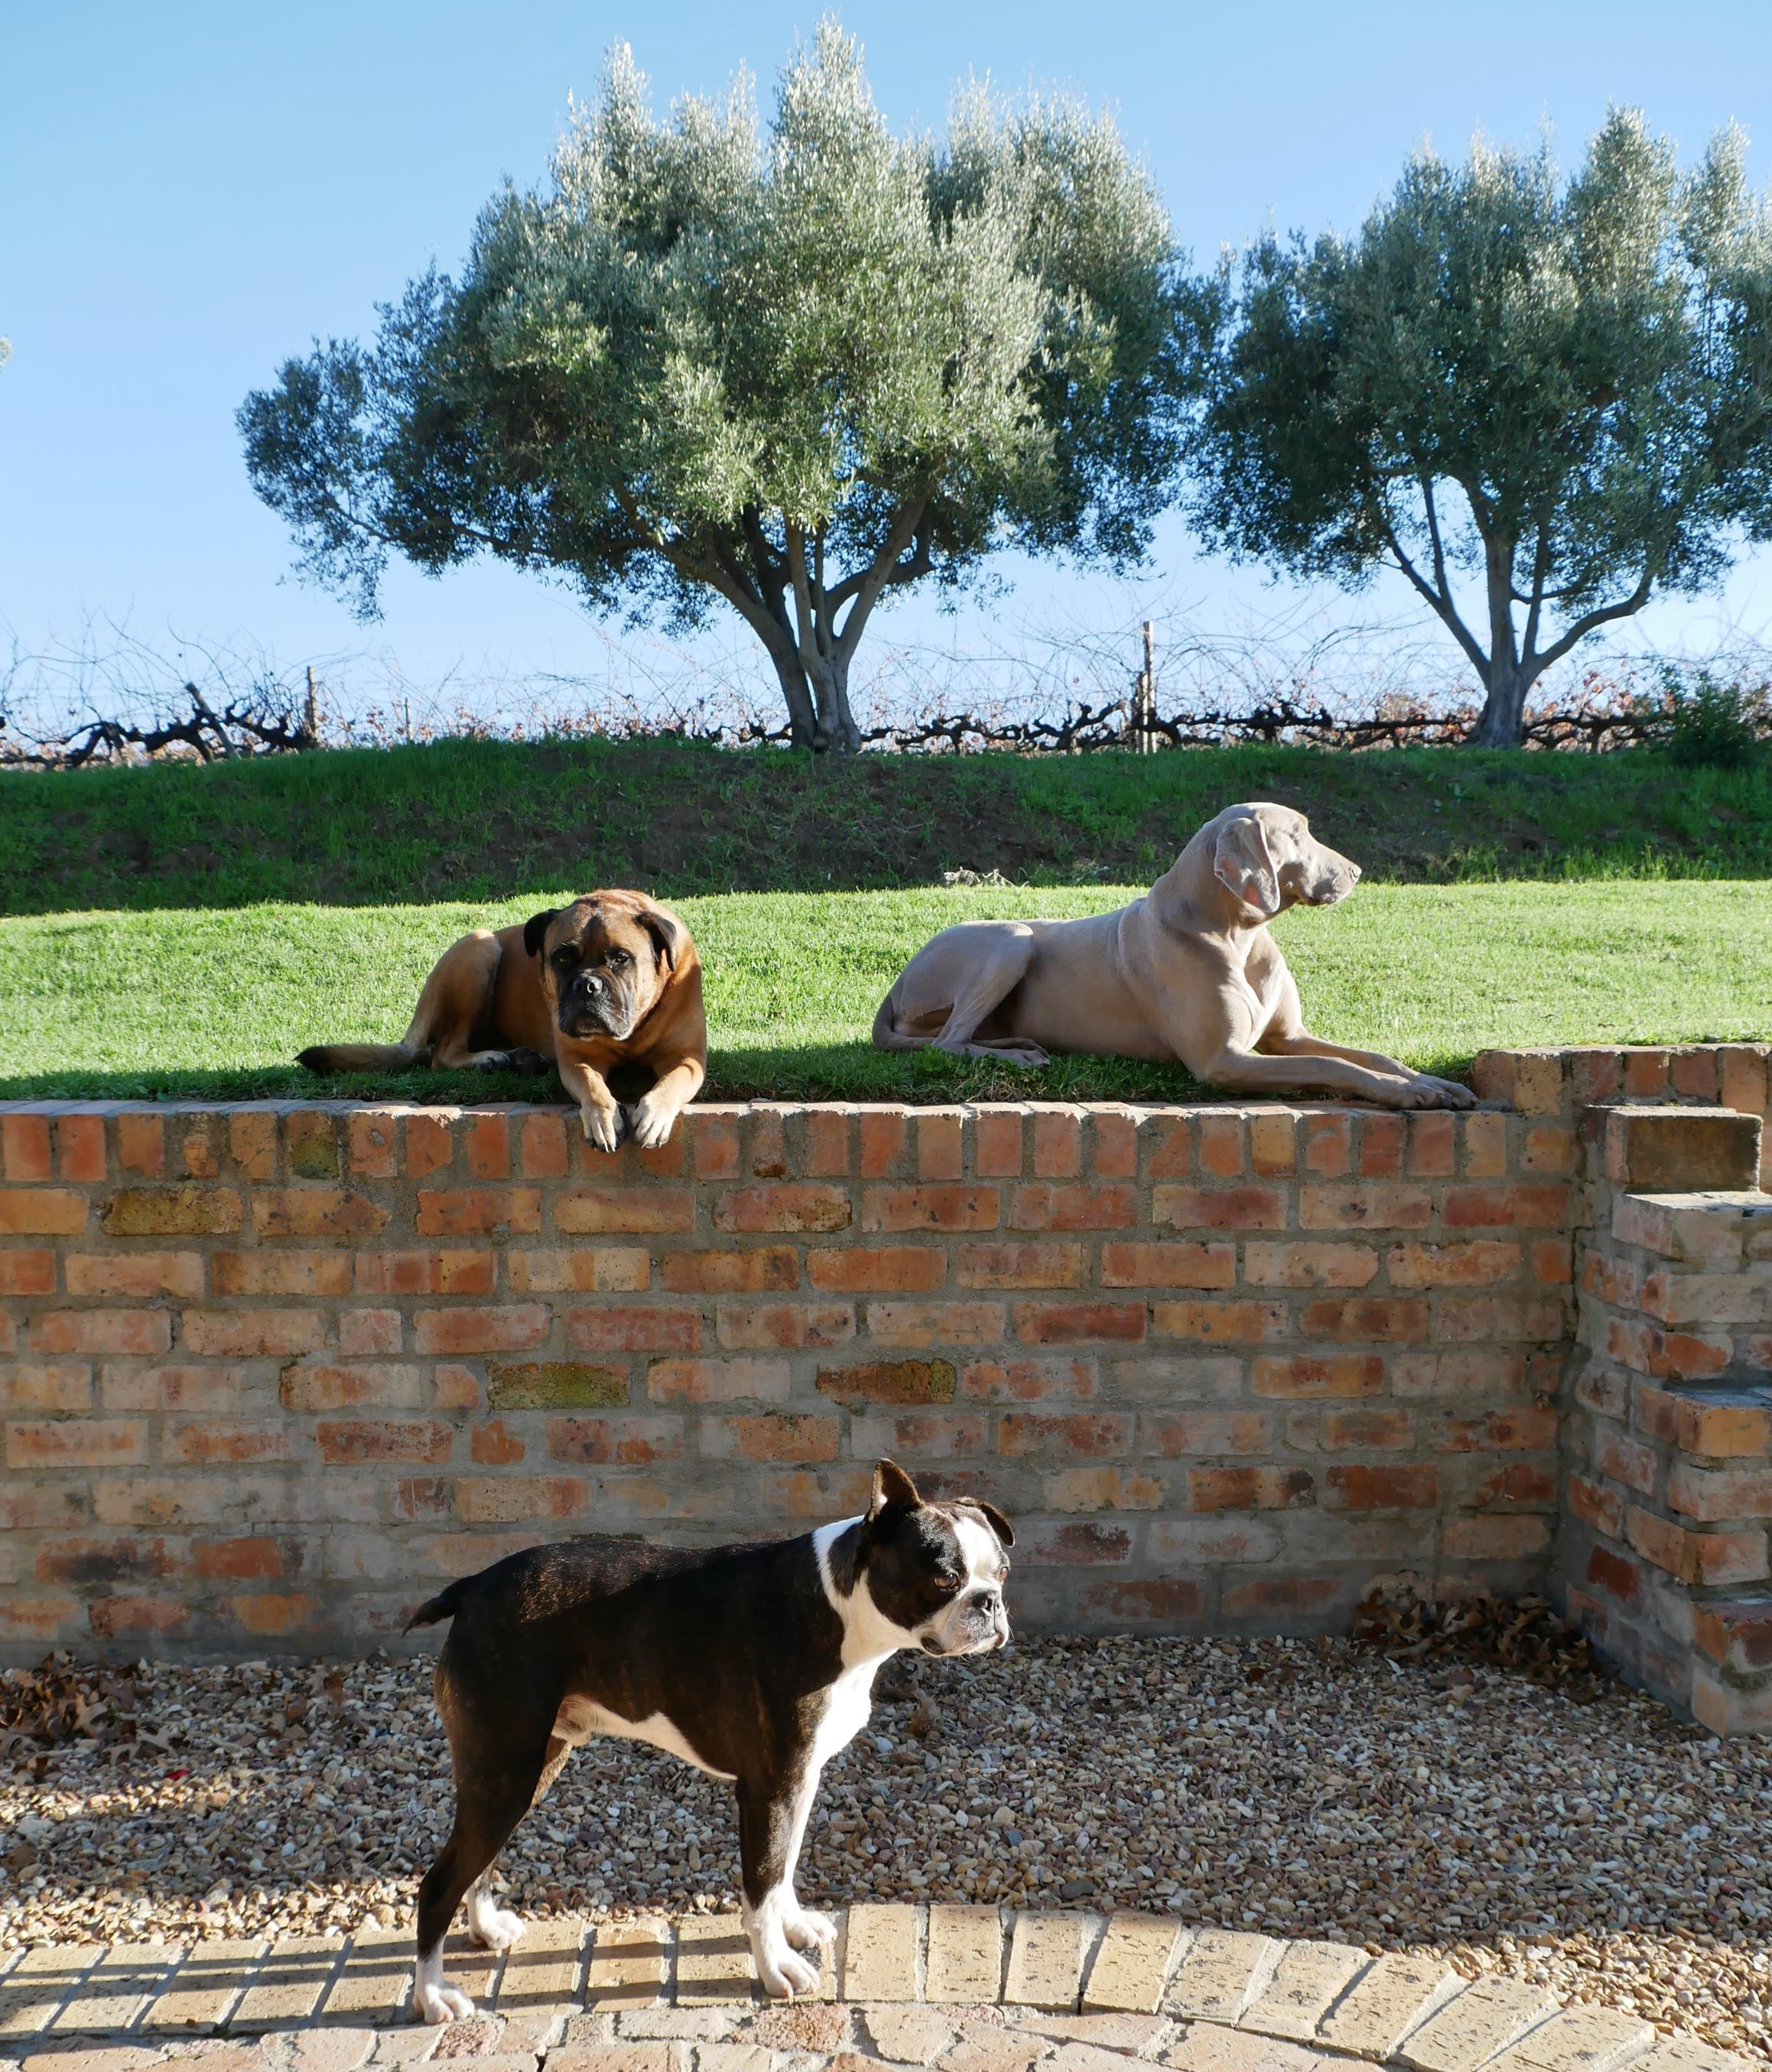 Dogs of Stellenbosch. Finley (front) and friends were fine company at Zebra Cottage